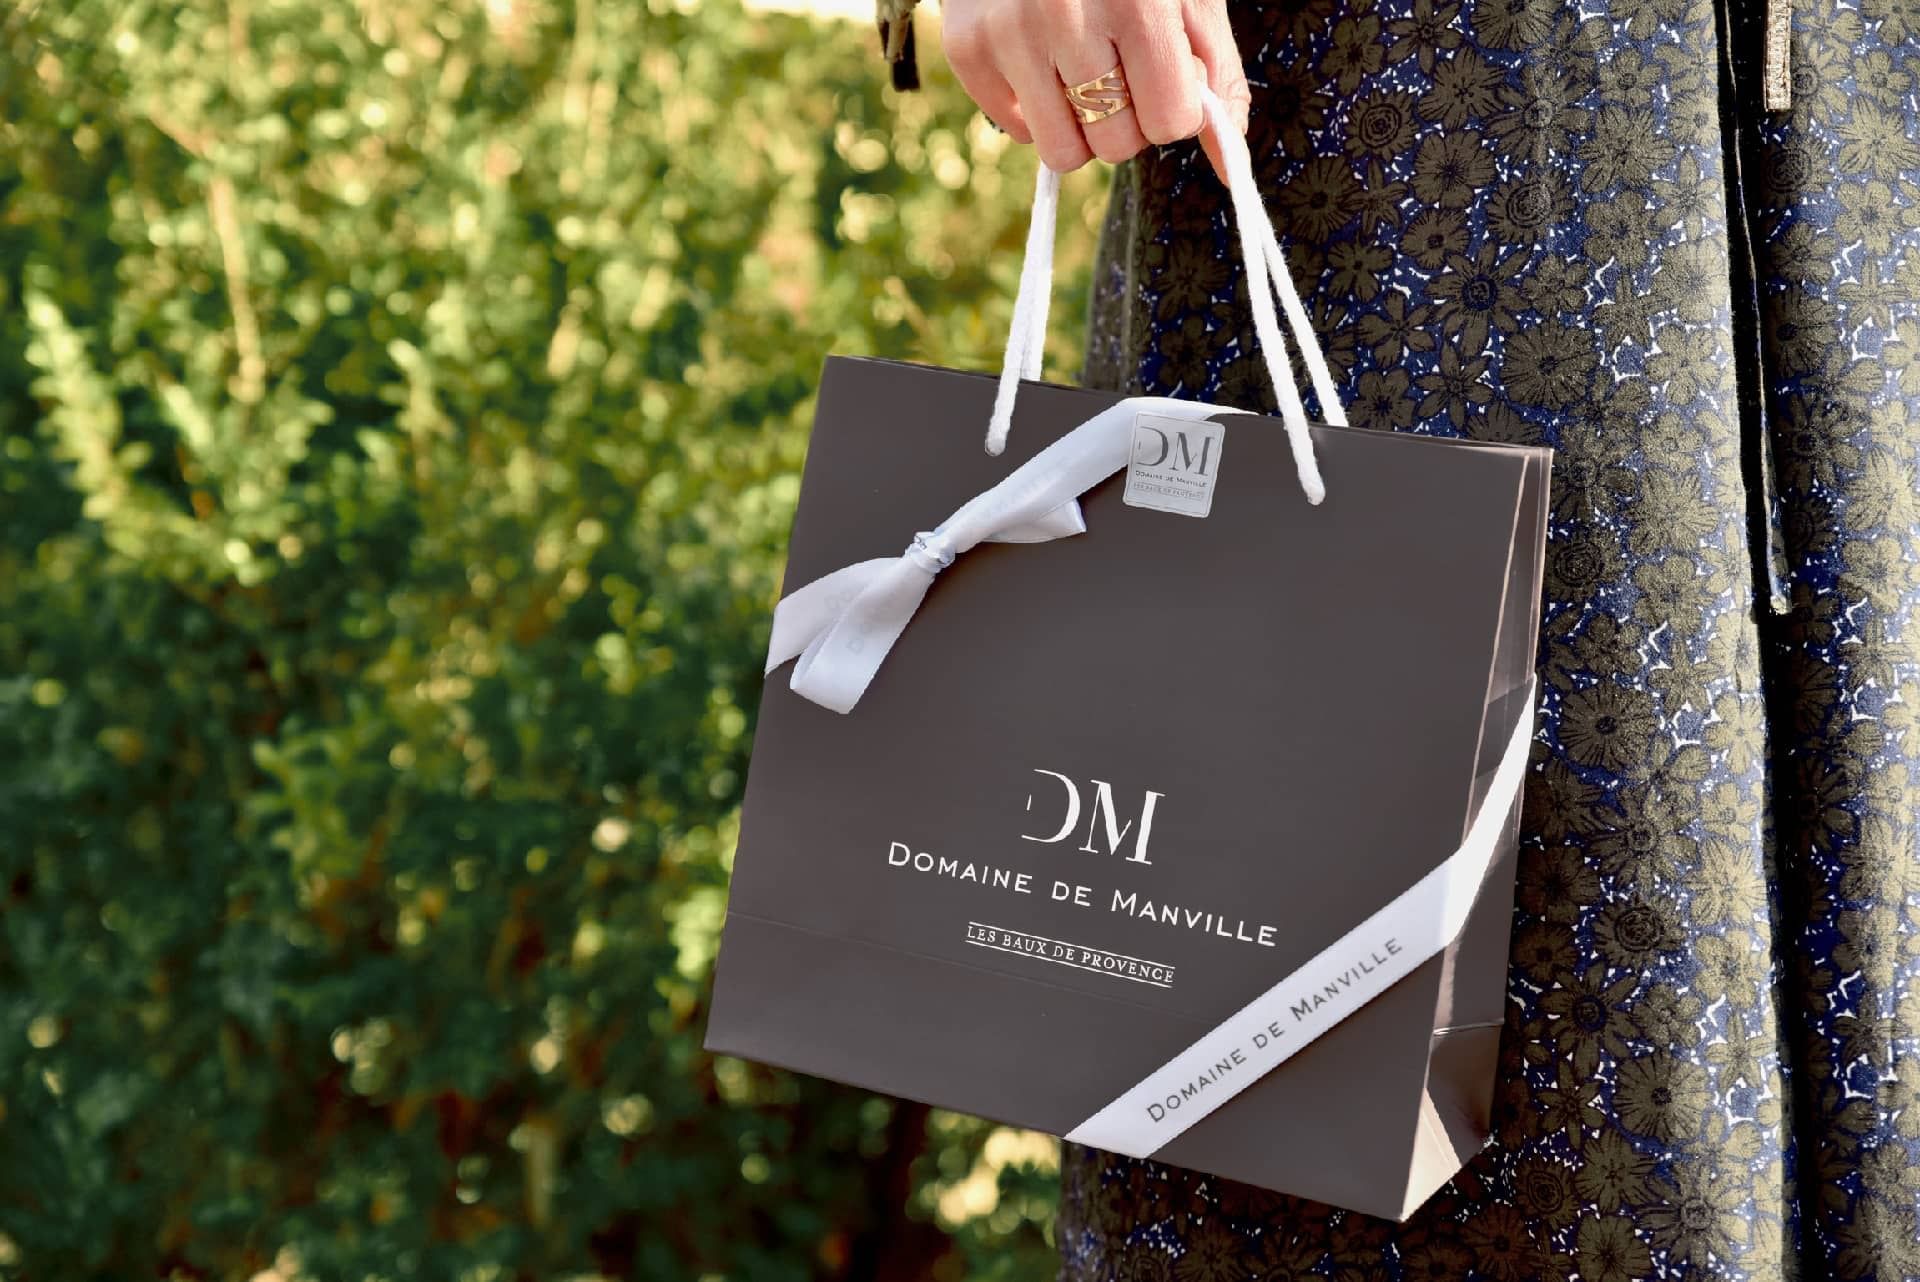 Bag with hotel name & logo used at Domaine de Manville